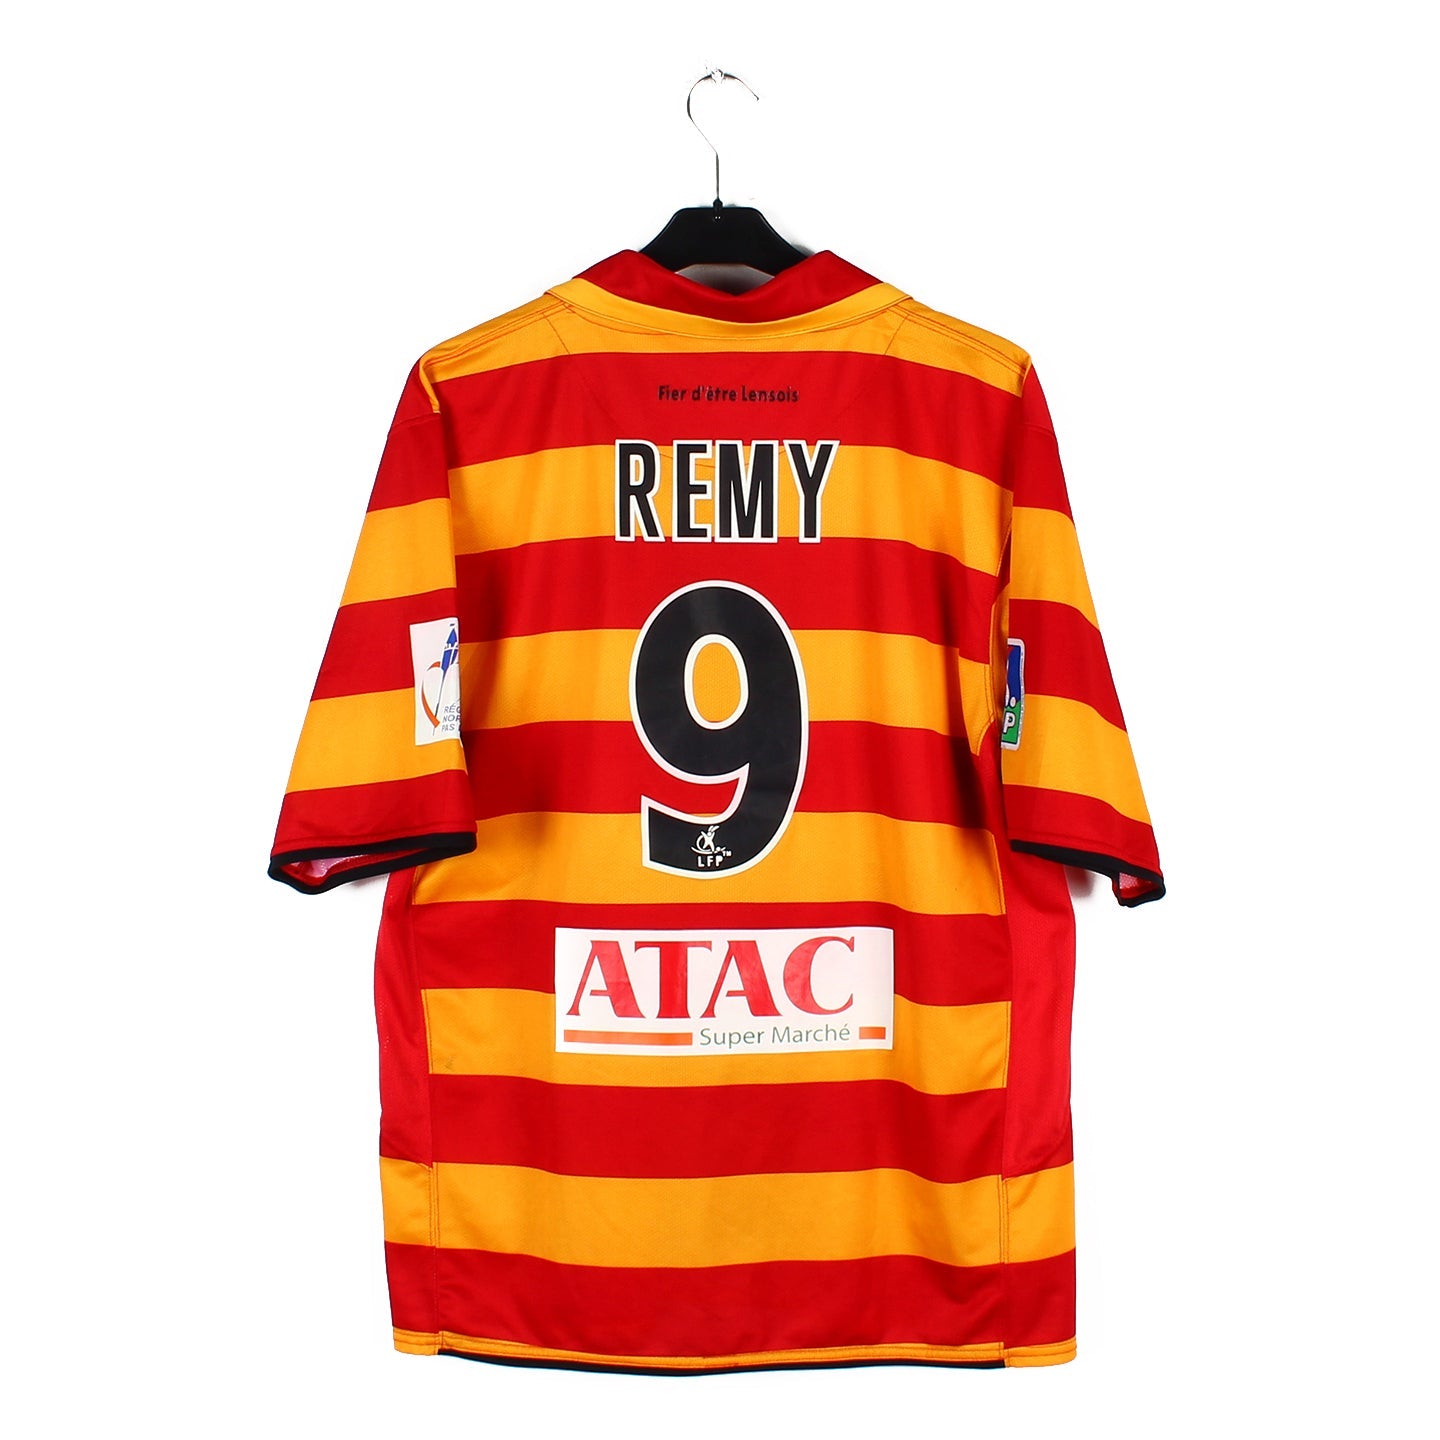 Maillot foot RC Lens signé (2007-08) – Vintage Football Area